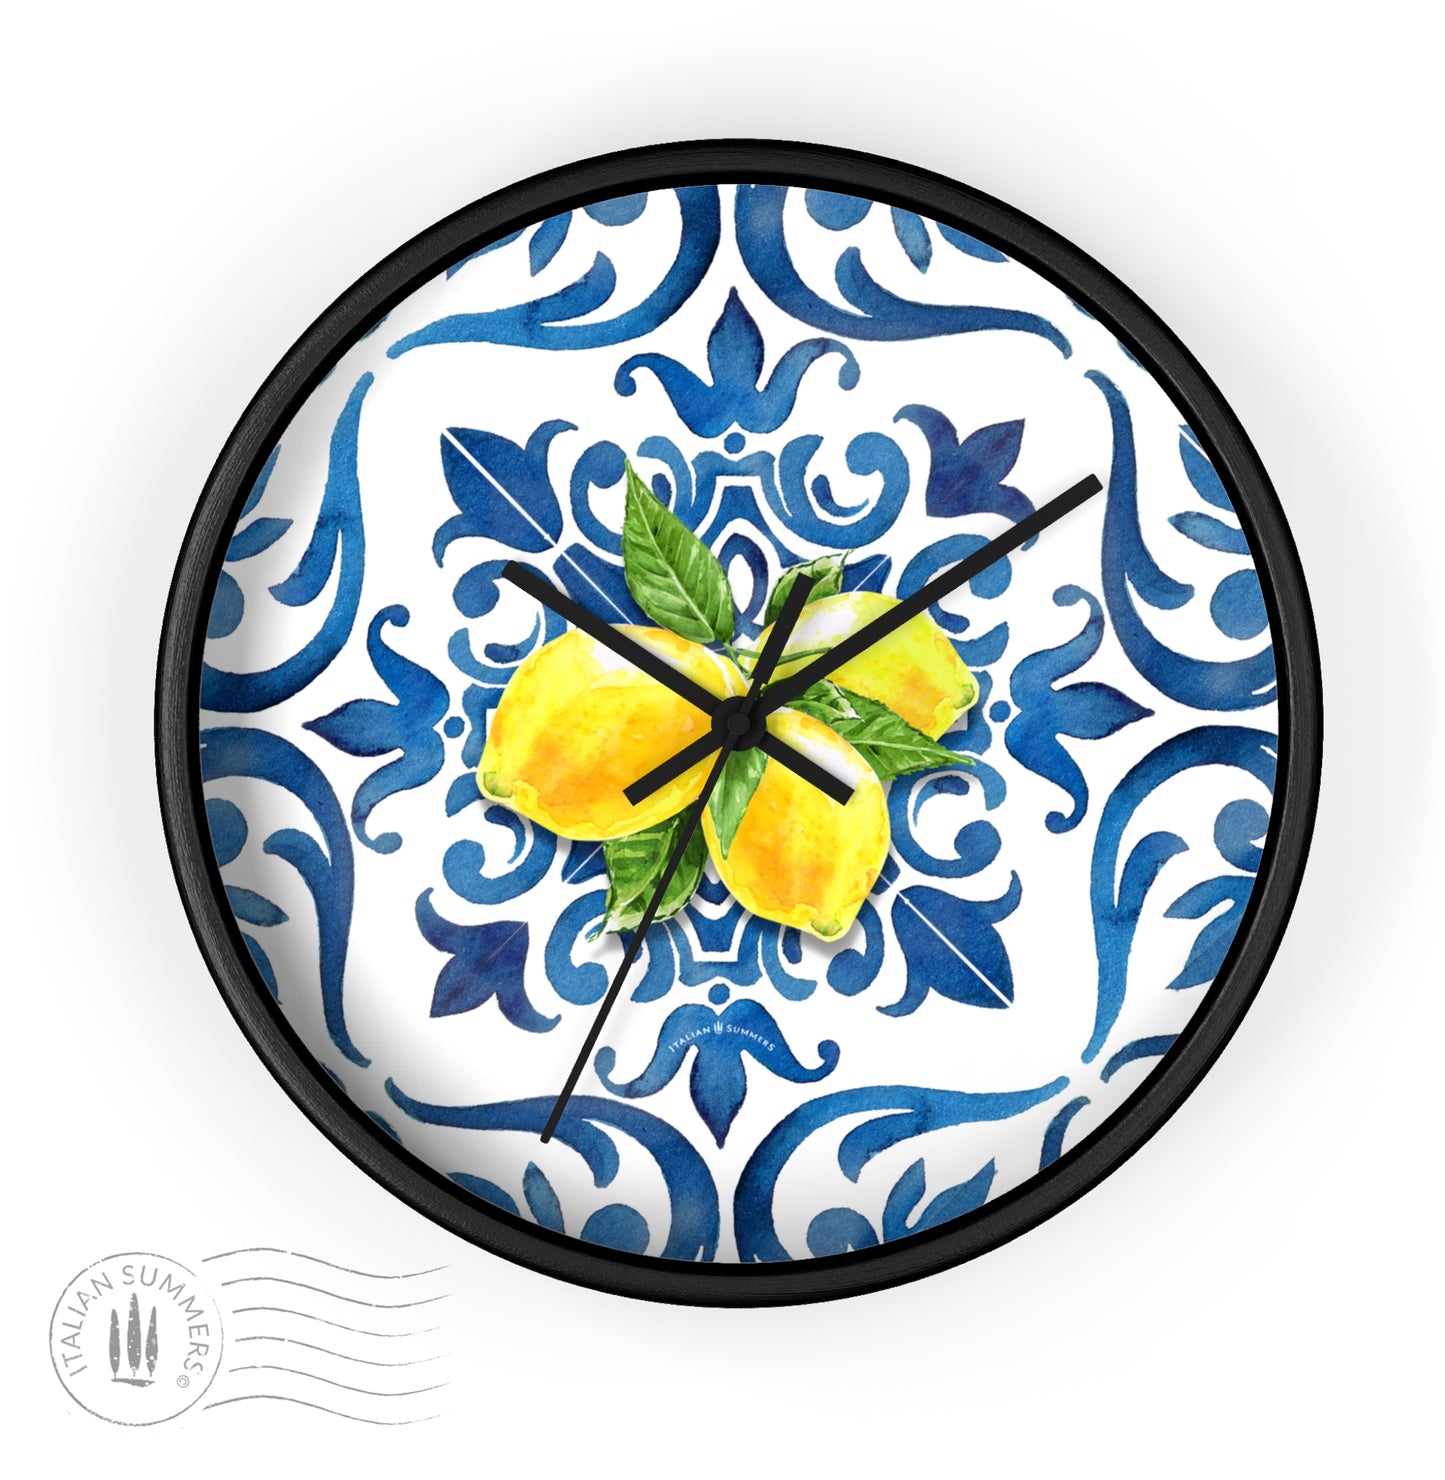  Whether you're a fan of maiolica blue tiles, Sorrento lemons, or both, this clock is sure to be the perfect addition to any room. 